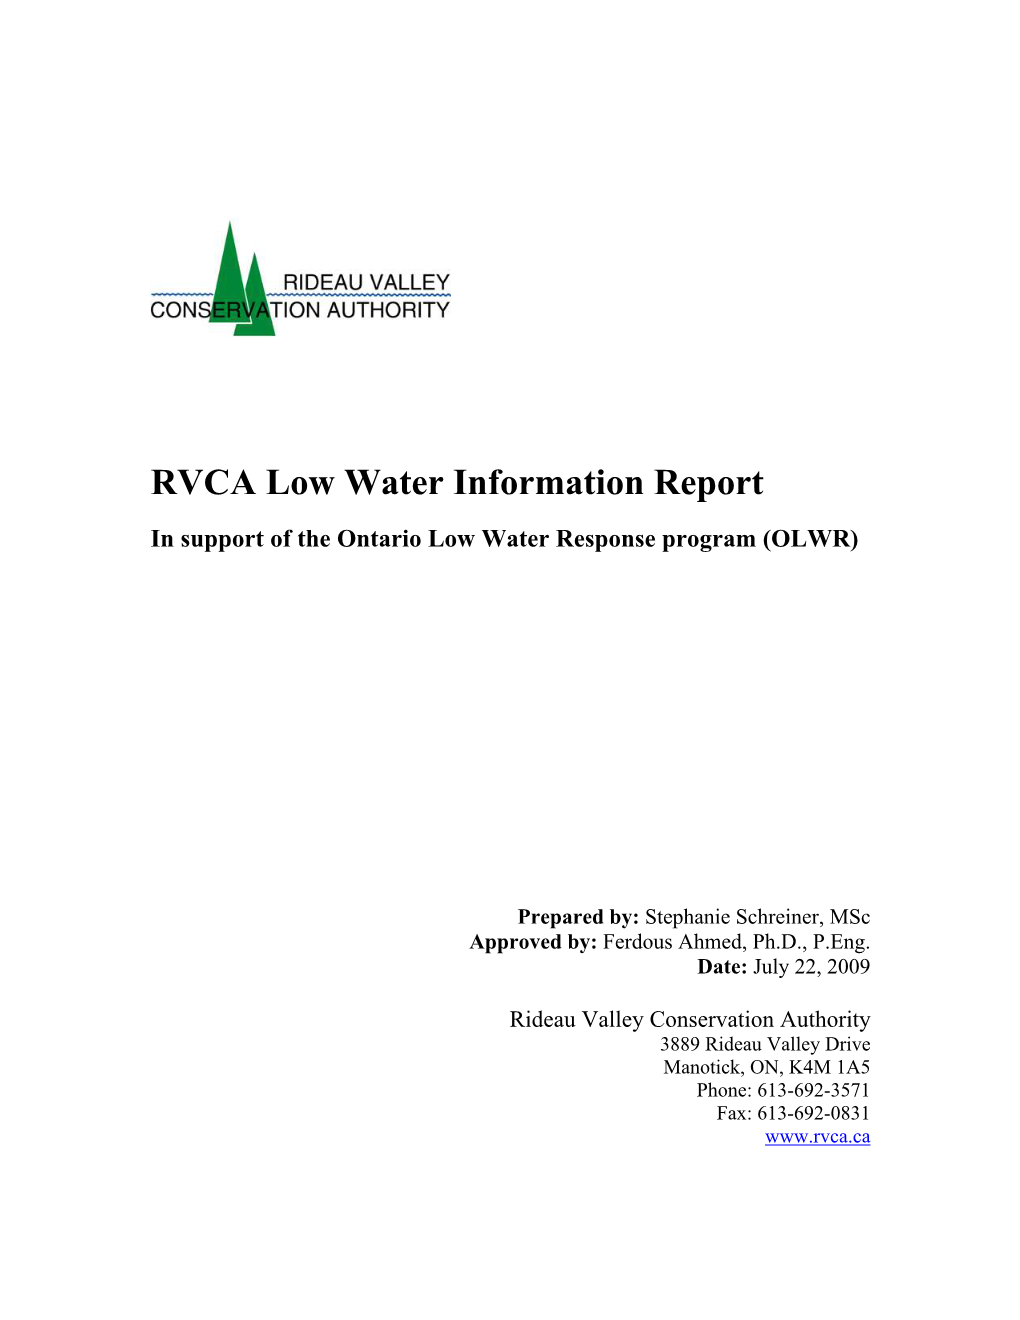 RVCA Low Water Information Report in Support of the Ontario Low Water Response Program (OLWR)